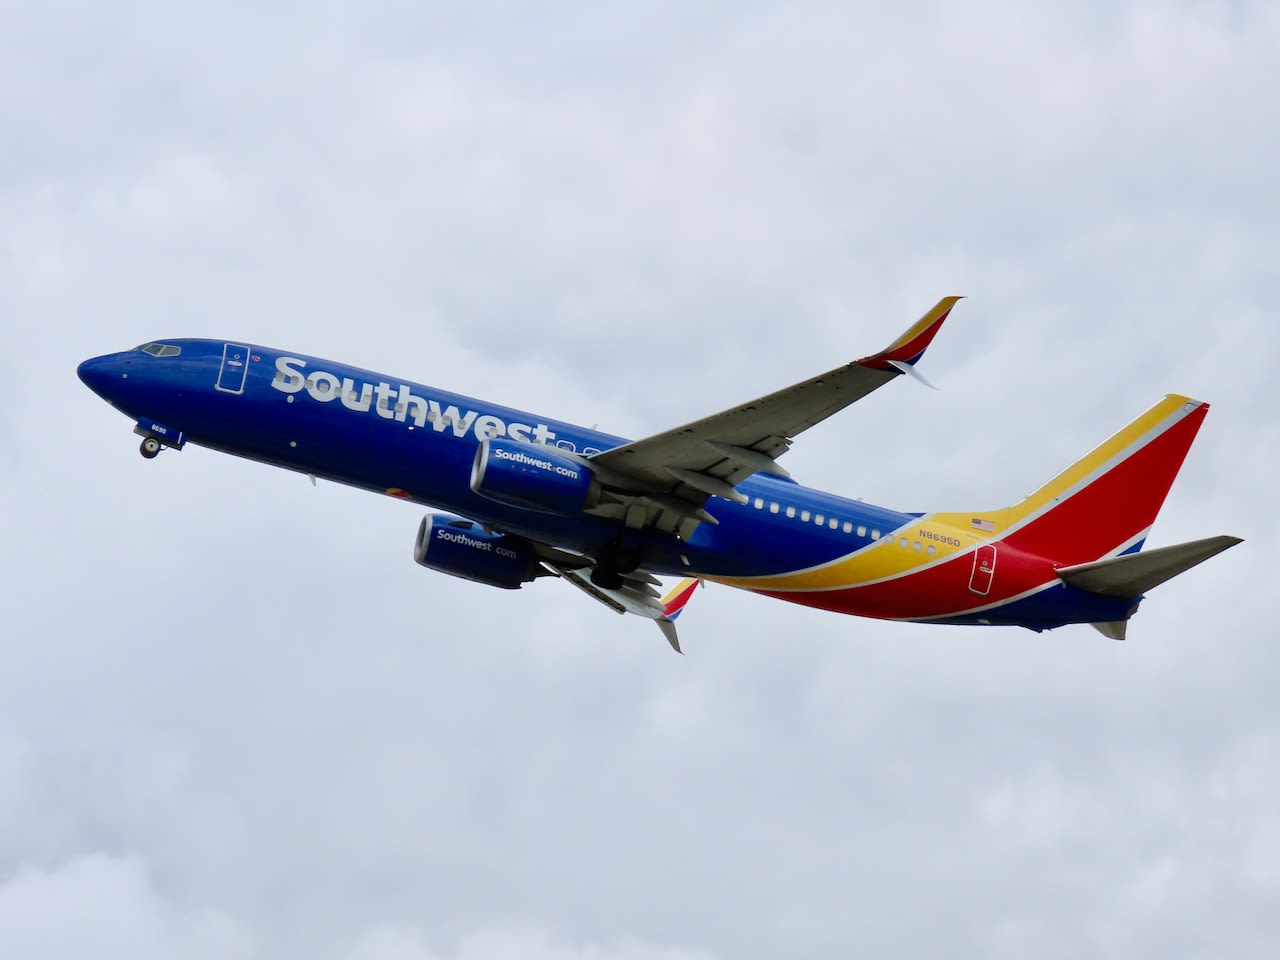 Southwest Airlines nonstop flight to Las Vegas added at Ford airport